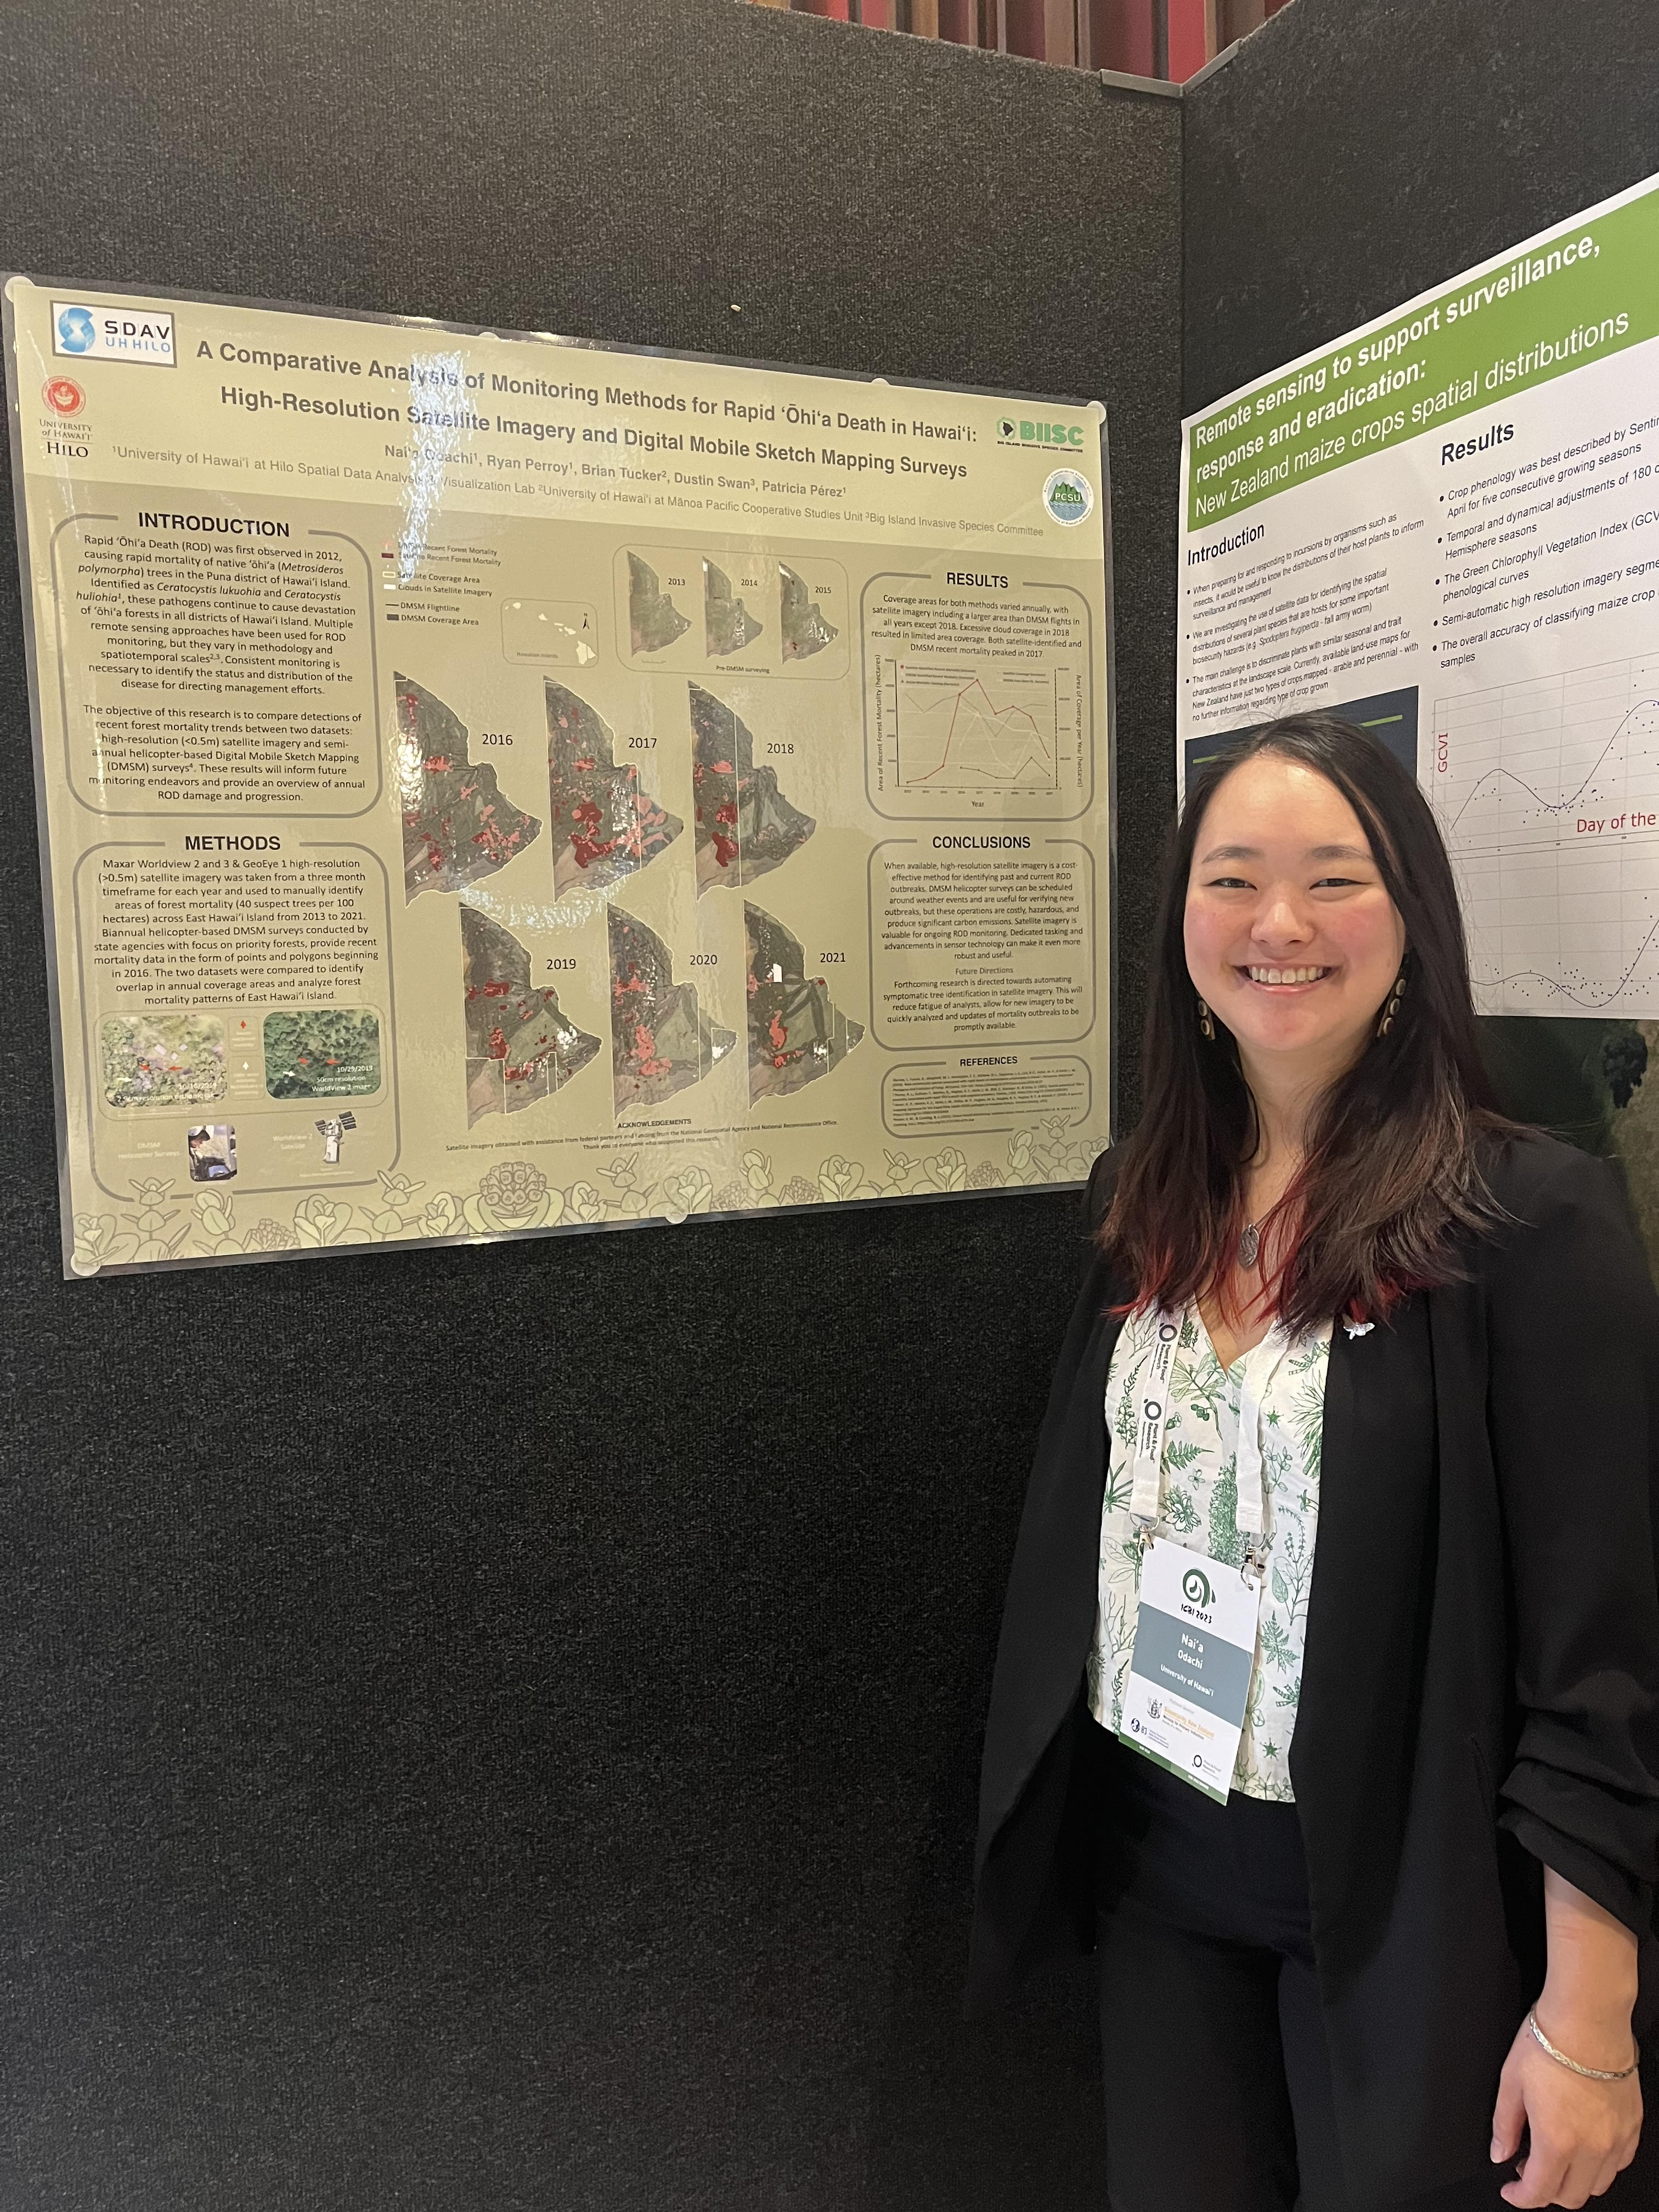 Naiʻa, dressed in business attire, stands next to a poster on "A comparaitve analysis of monitoring methods for Rapid 'Ōhi'a Death in Hawaiʻi